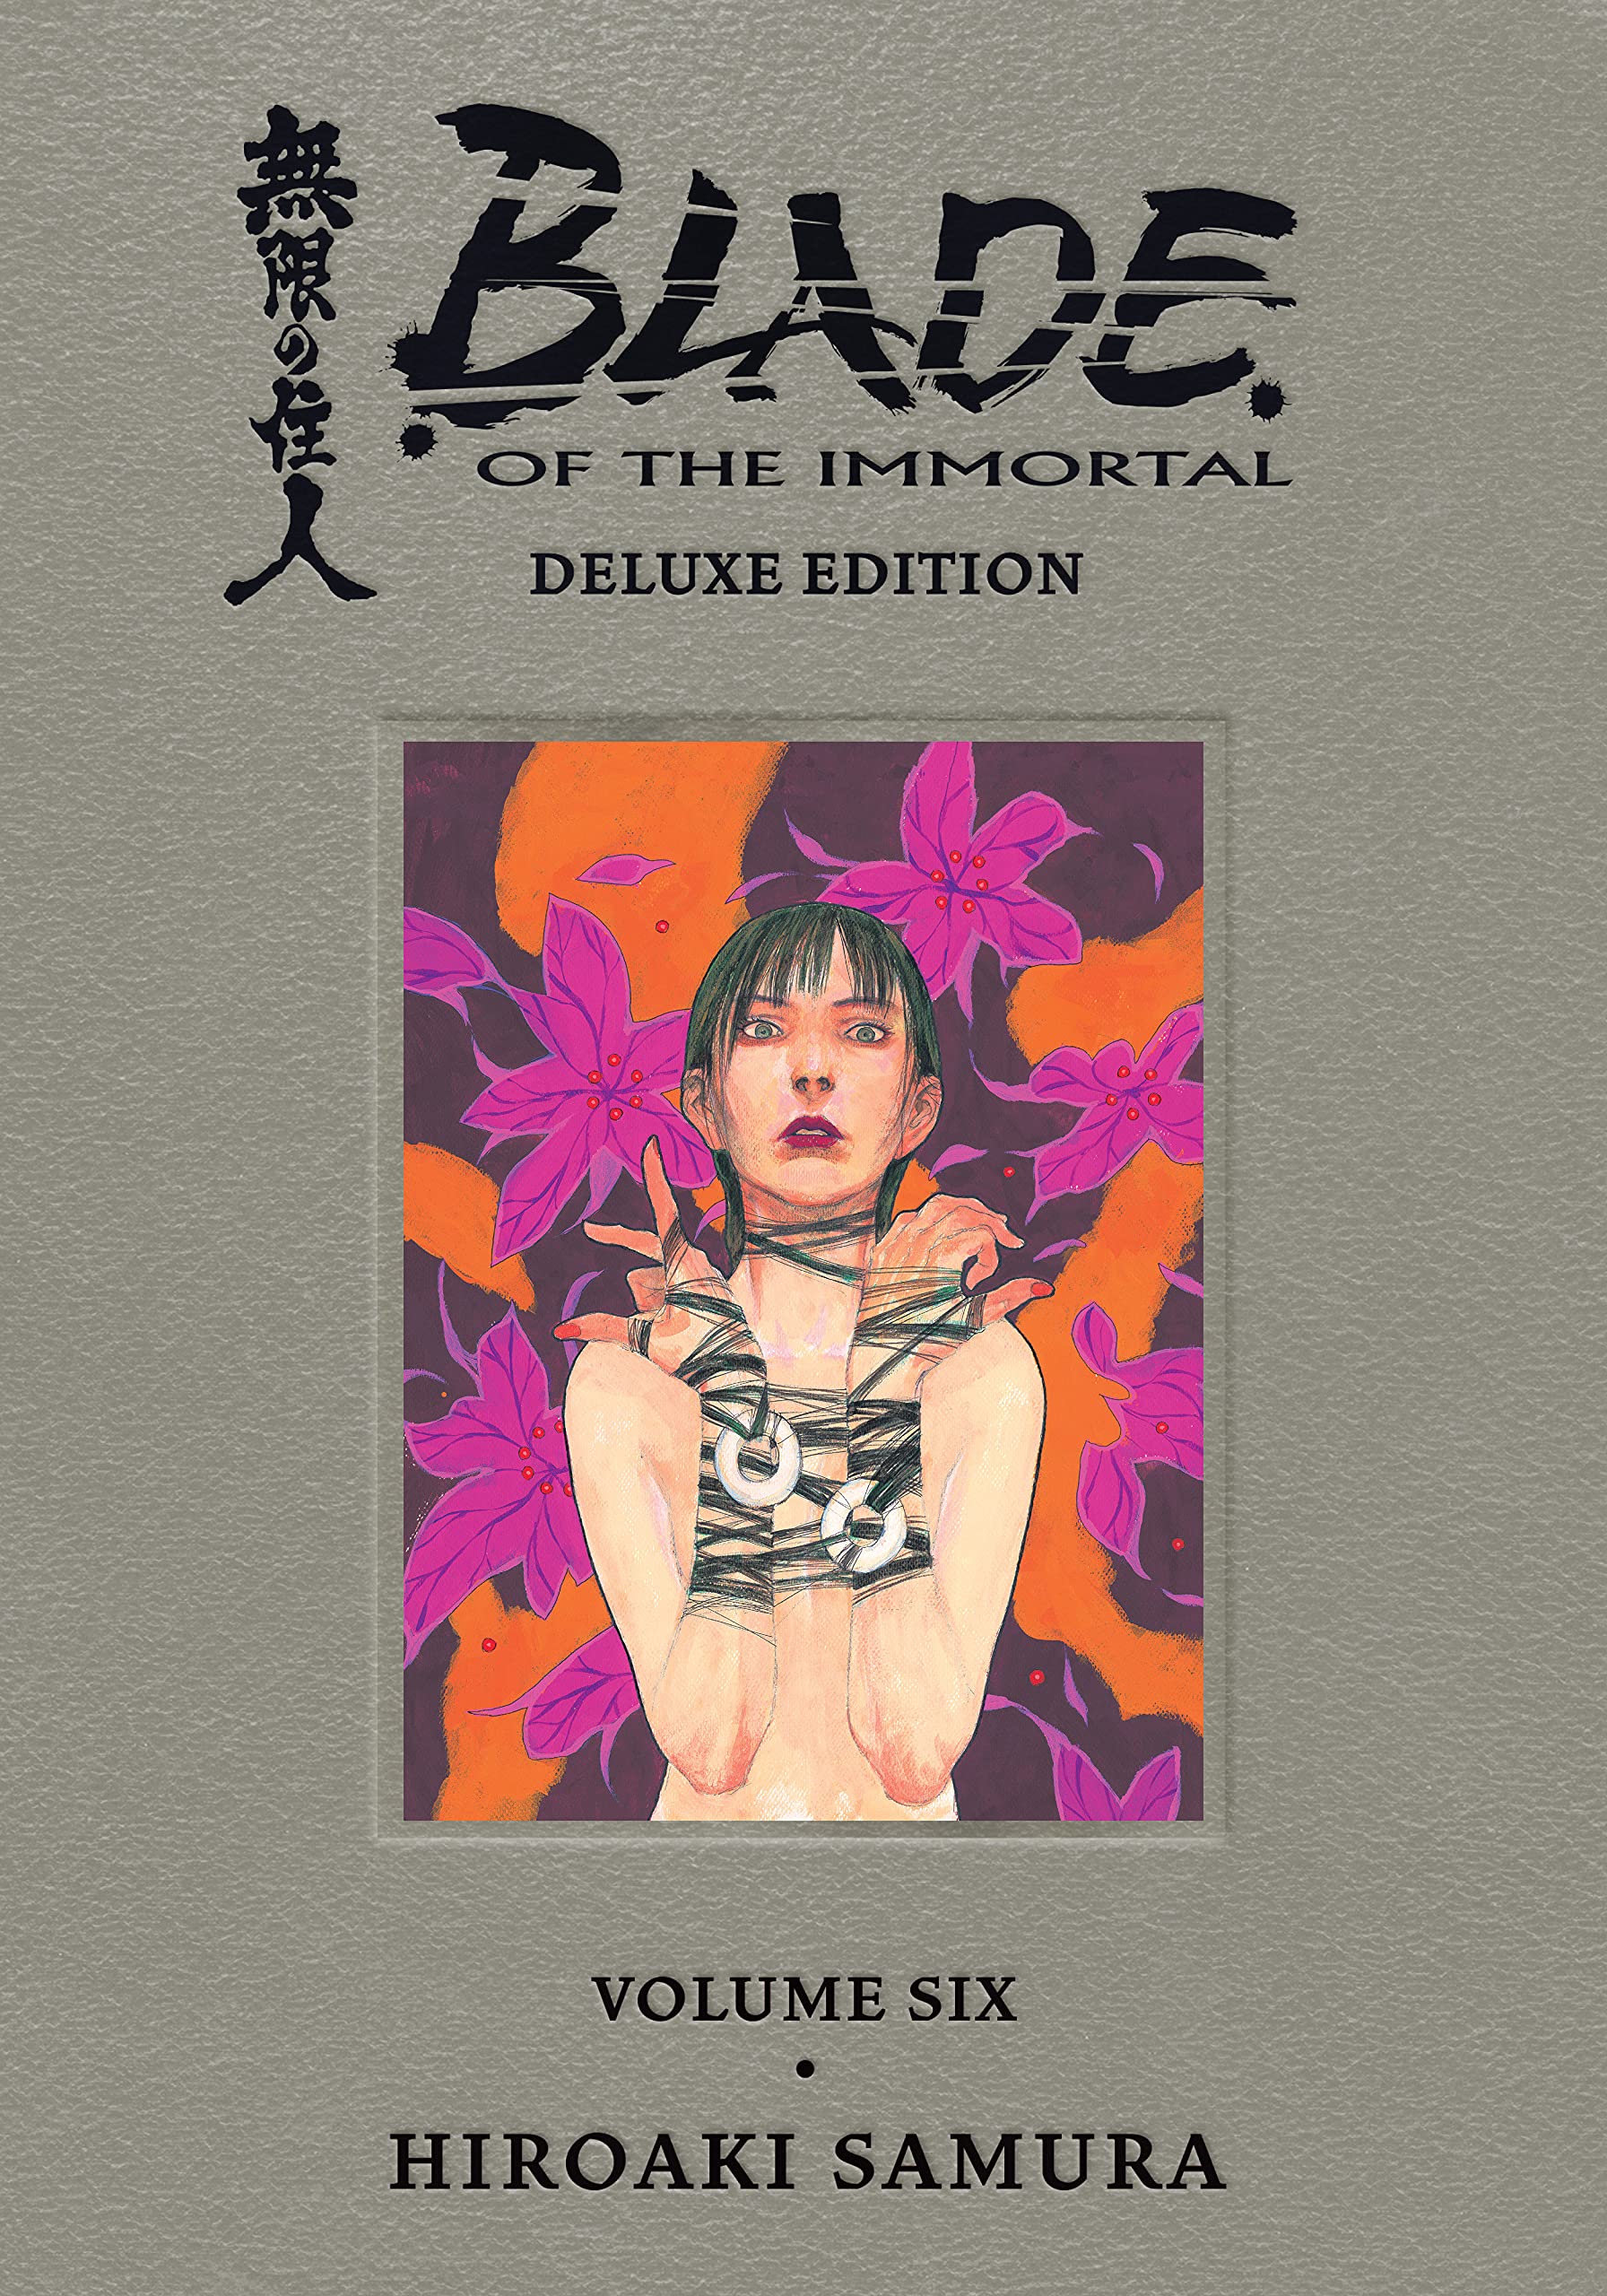 Blade of the Immortal Deluxe Edition Vol. 06